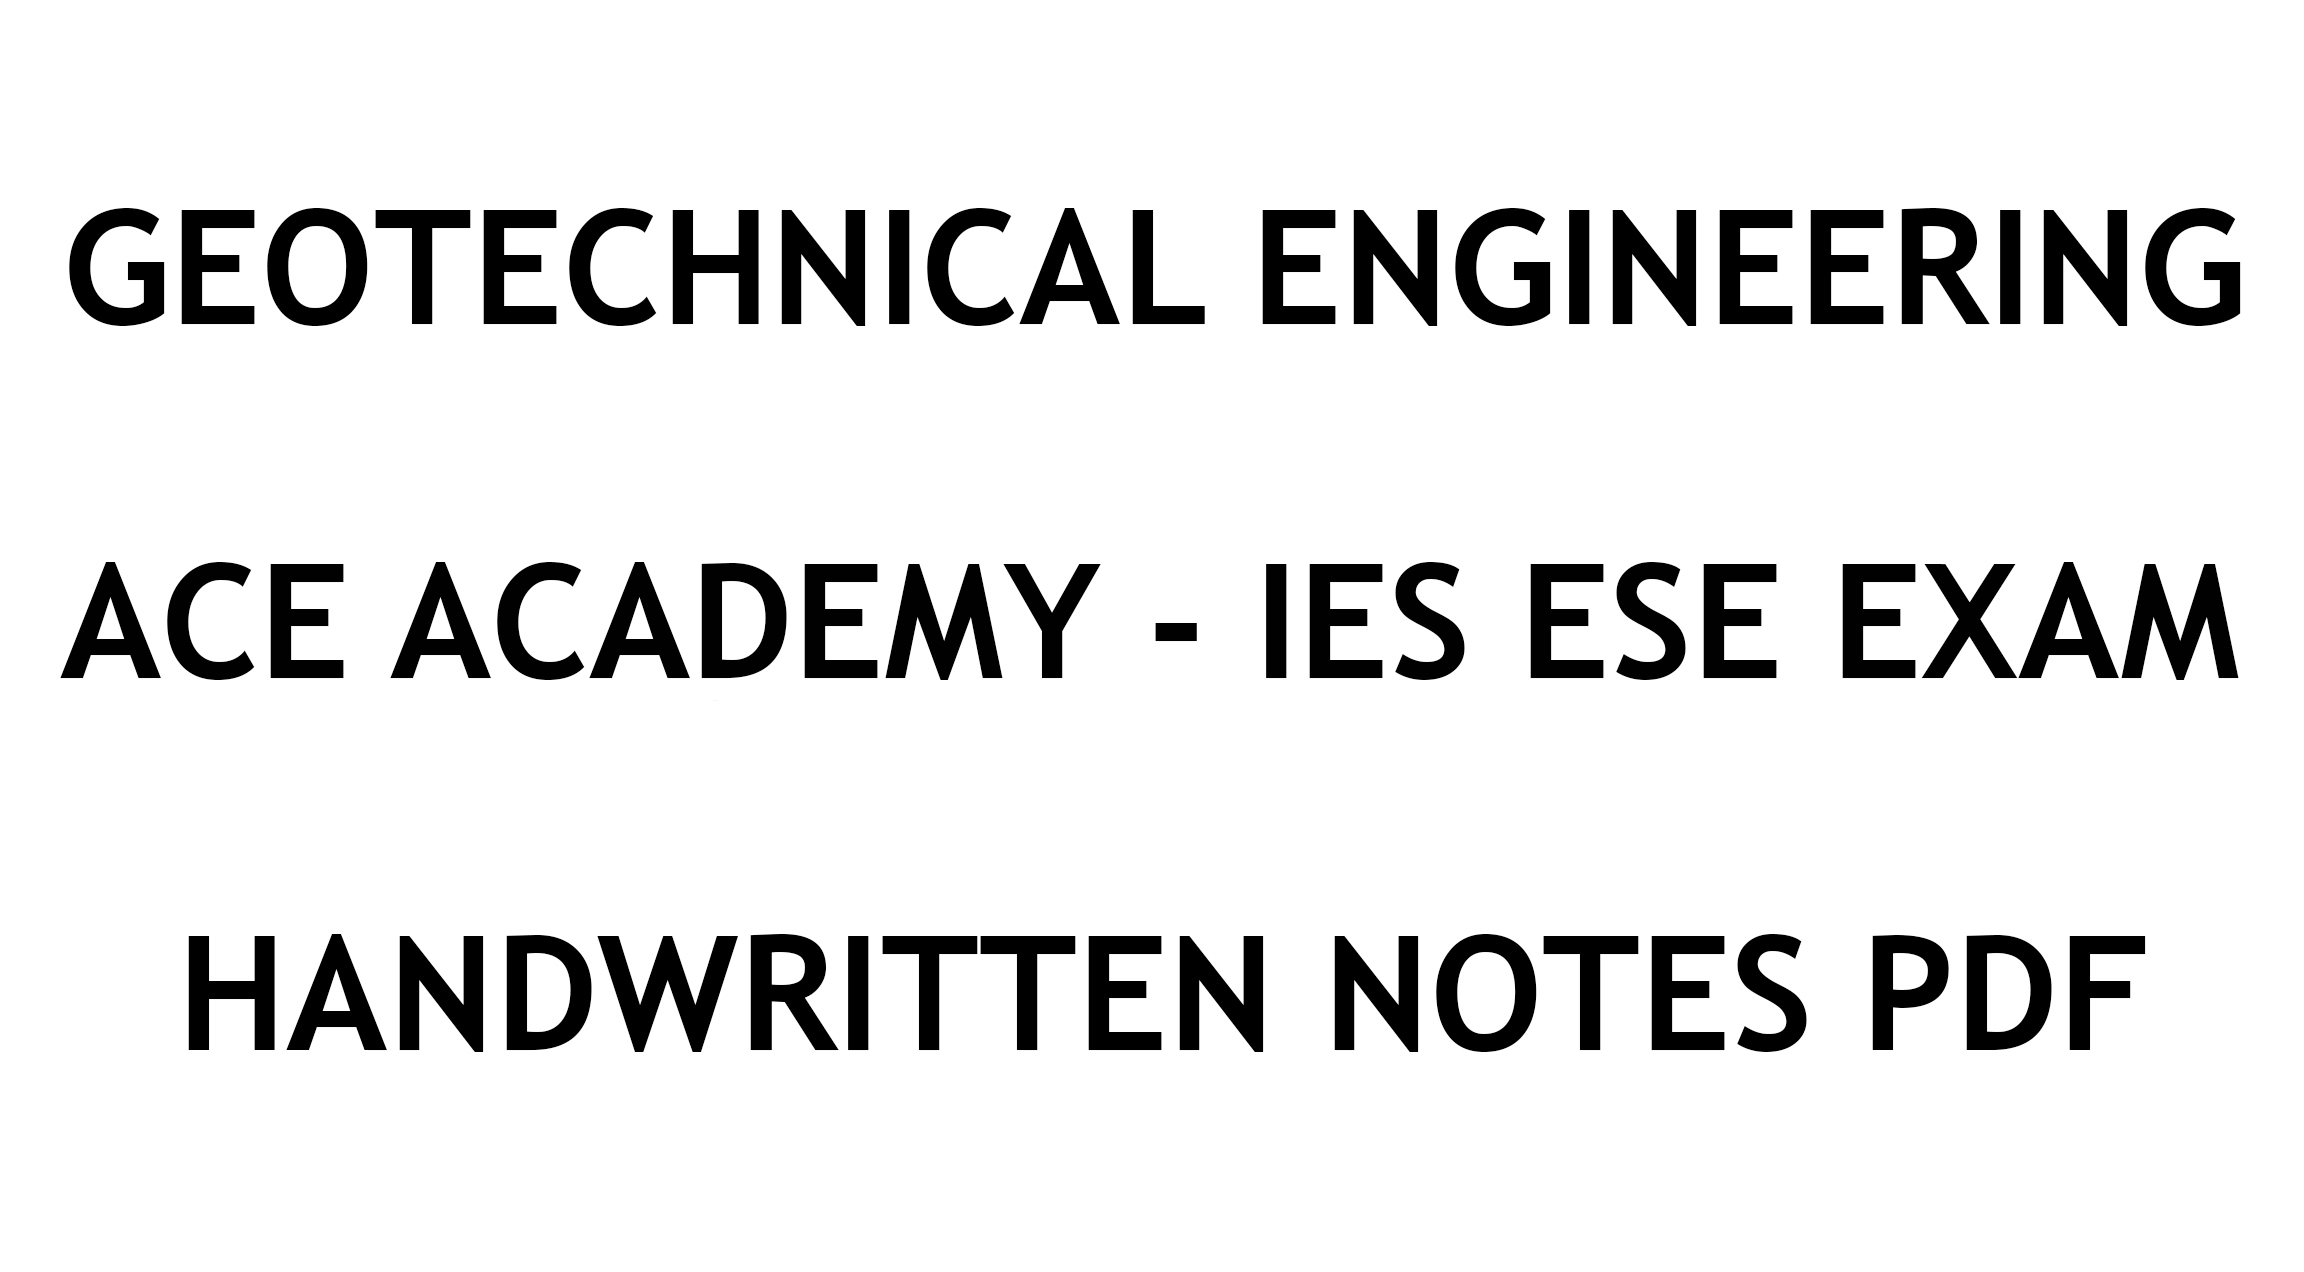 Geotechnical Engineering IES ESE Exam Ace Academy Notes